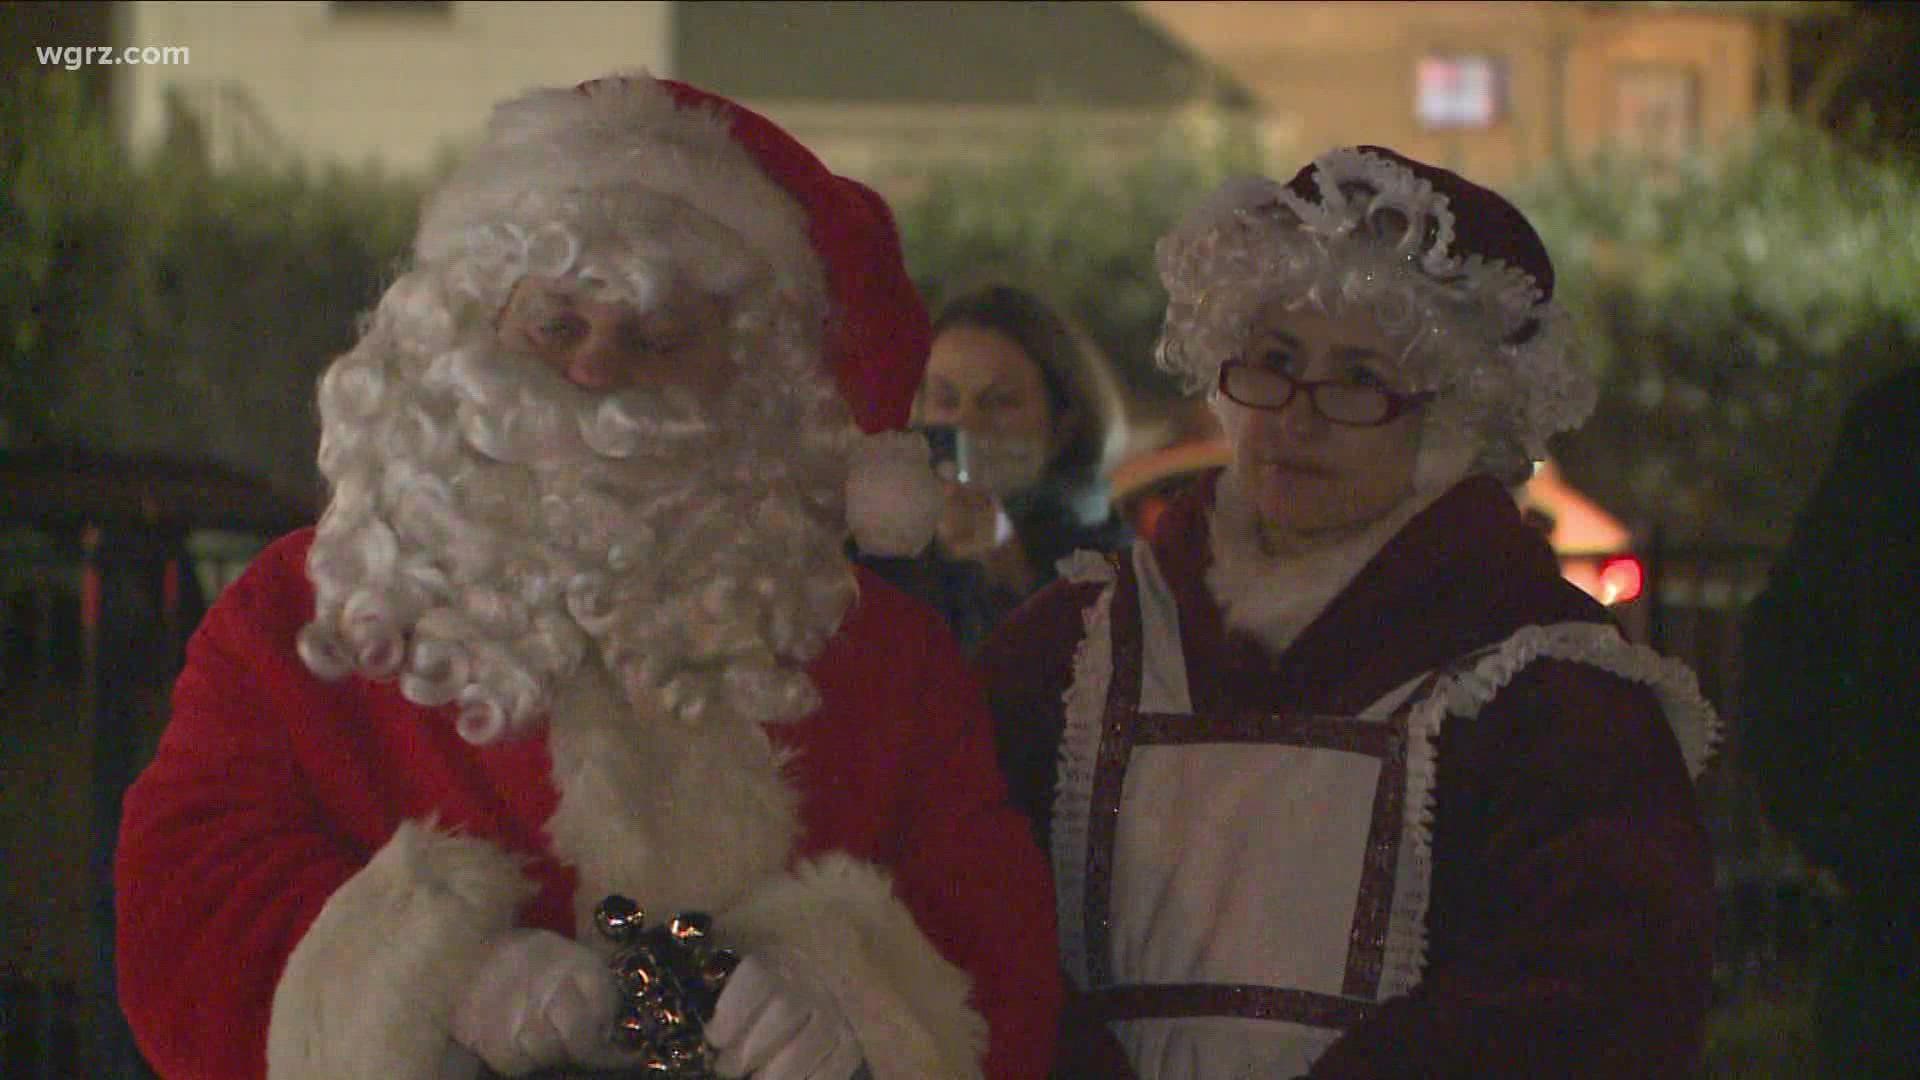 The cultural center celebrated Saturday night's tree lighting ceremony at their newly Christened building on Hertel Avenue.